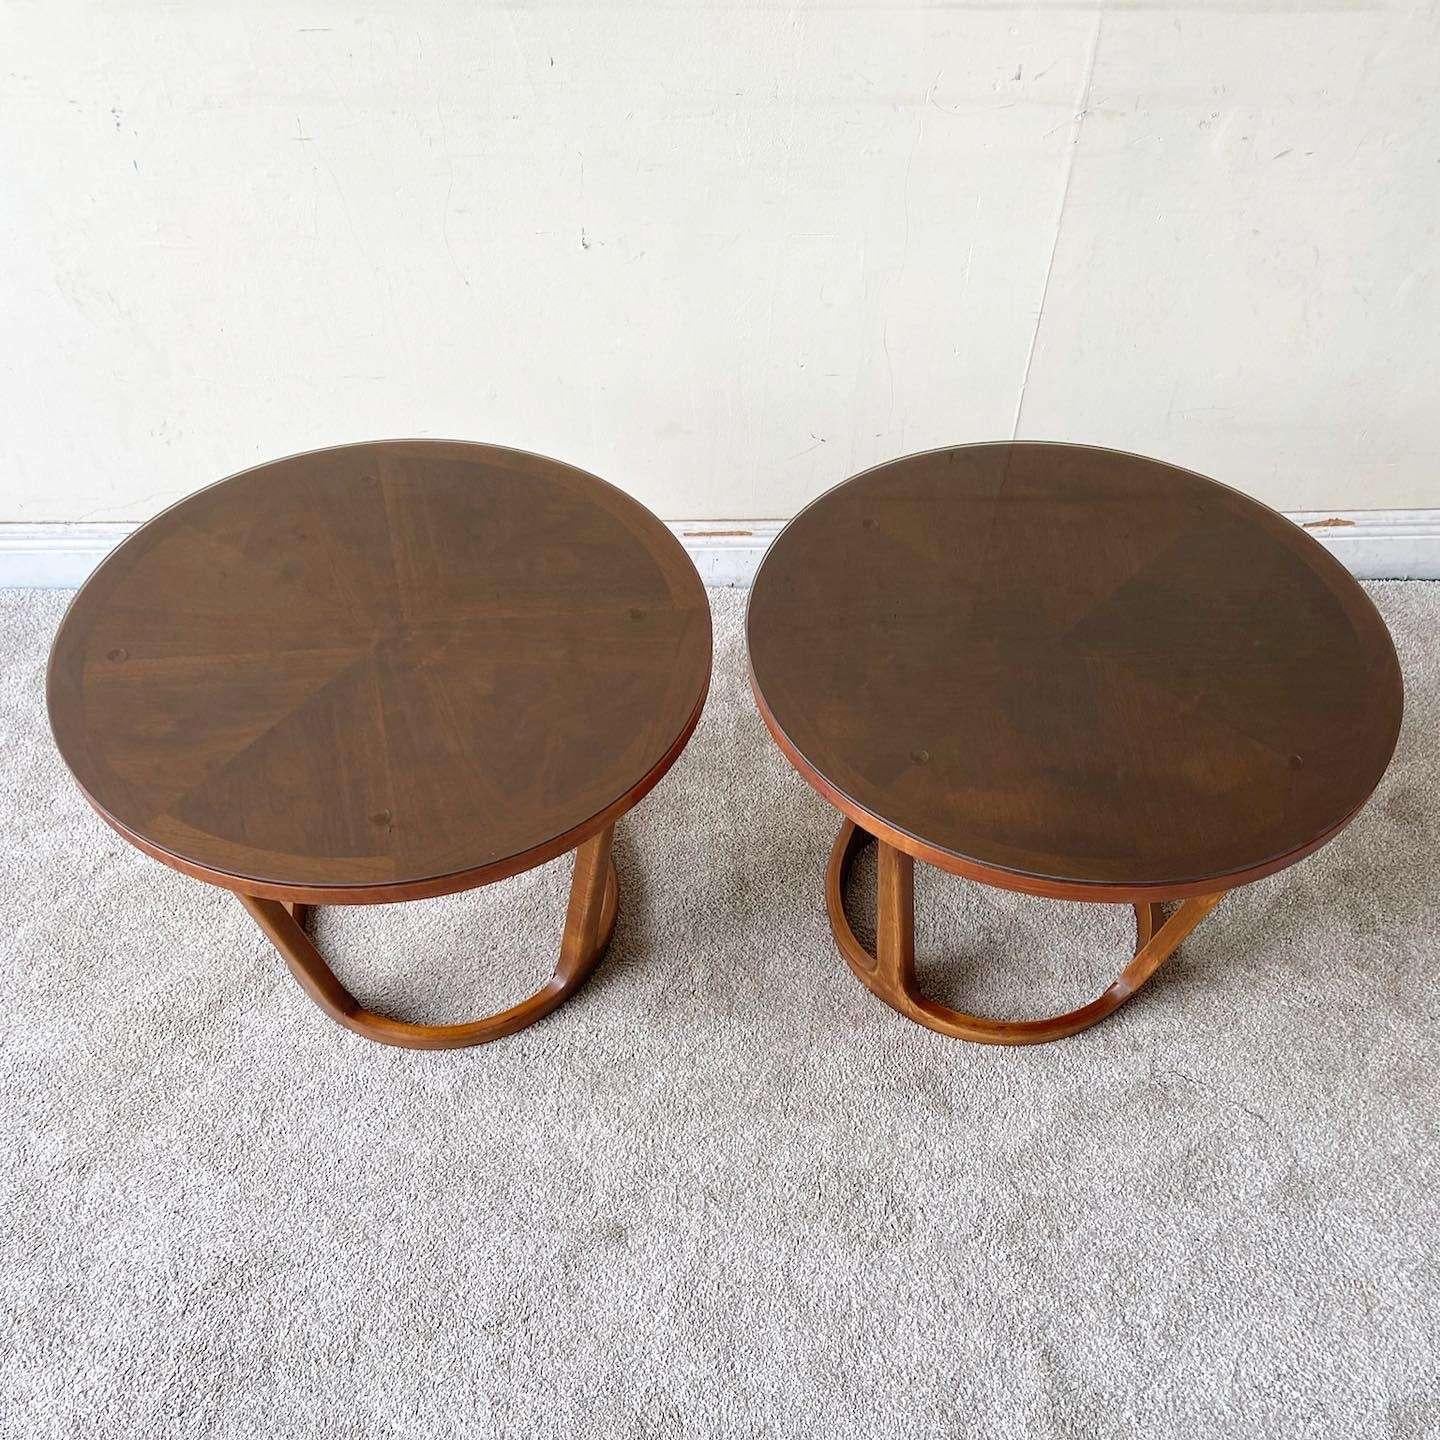 Exceptional mid-century modern round end table in walnut from the Rhythm Collection by Lane Furniture. In their brochure as Drum Table 997-22. It retains its original makers mark as well as model number 997.22 and serial numbers.